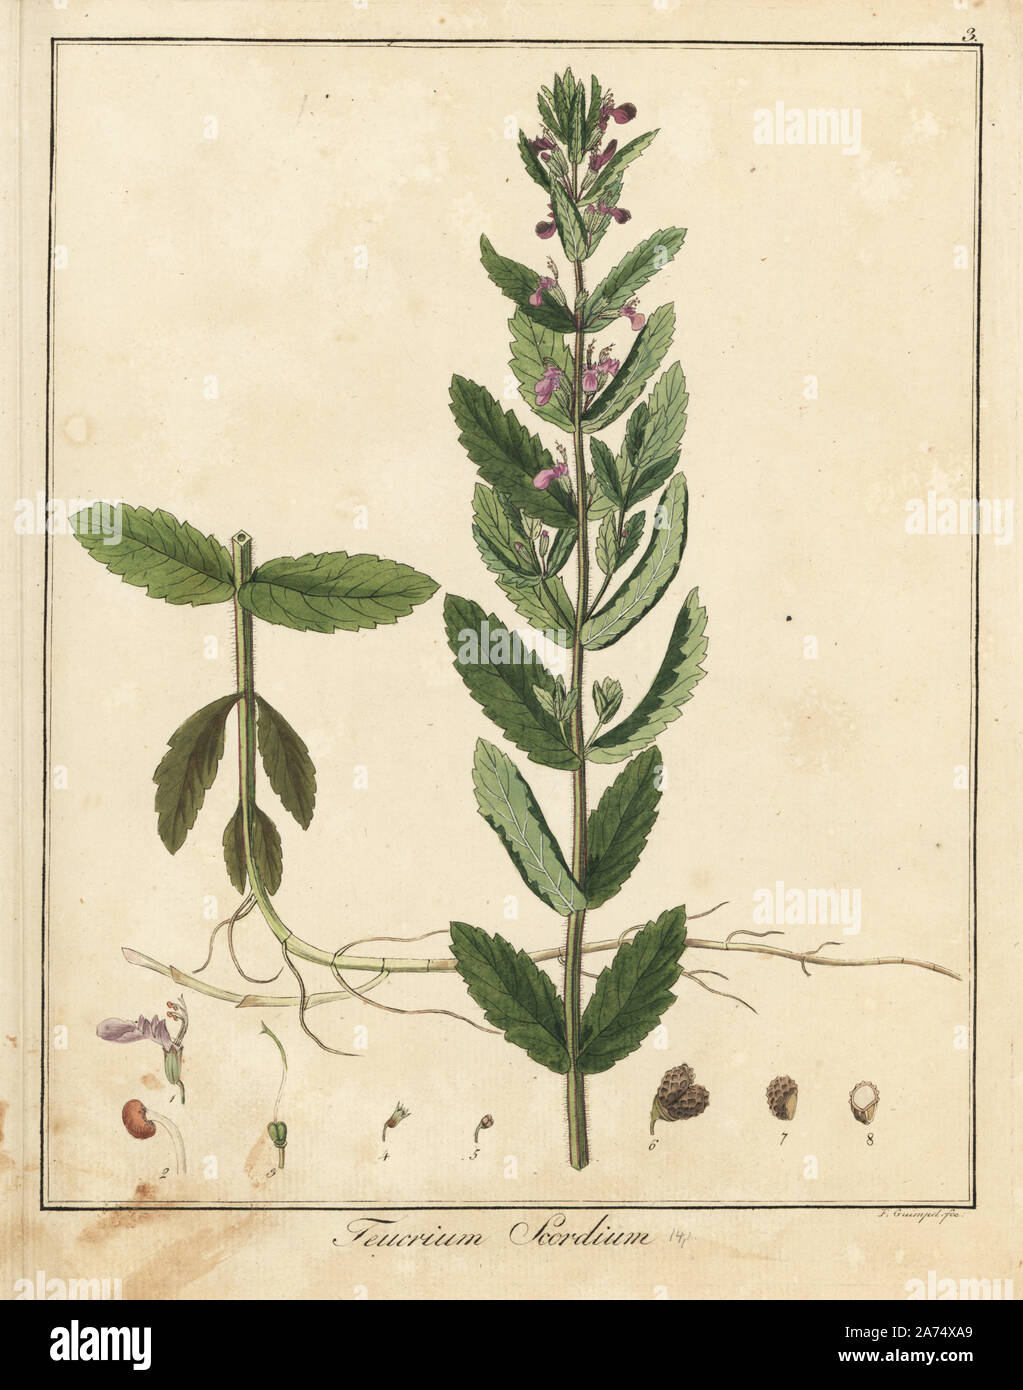 Water germander, Teucrium scordium. Handcoloured copperplate engraving by F. Guimpel from Dr. Friedrich Gottlob Hayne's Medical Botany, Berlin, 1822. Hayne (1763-1832) was a German botanist, apothecary and professor of pharmaceutical botany at Berlin University. Stock Photo